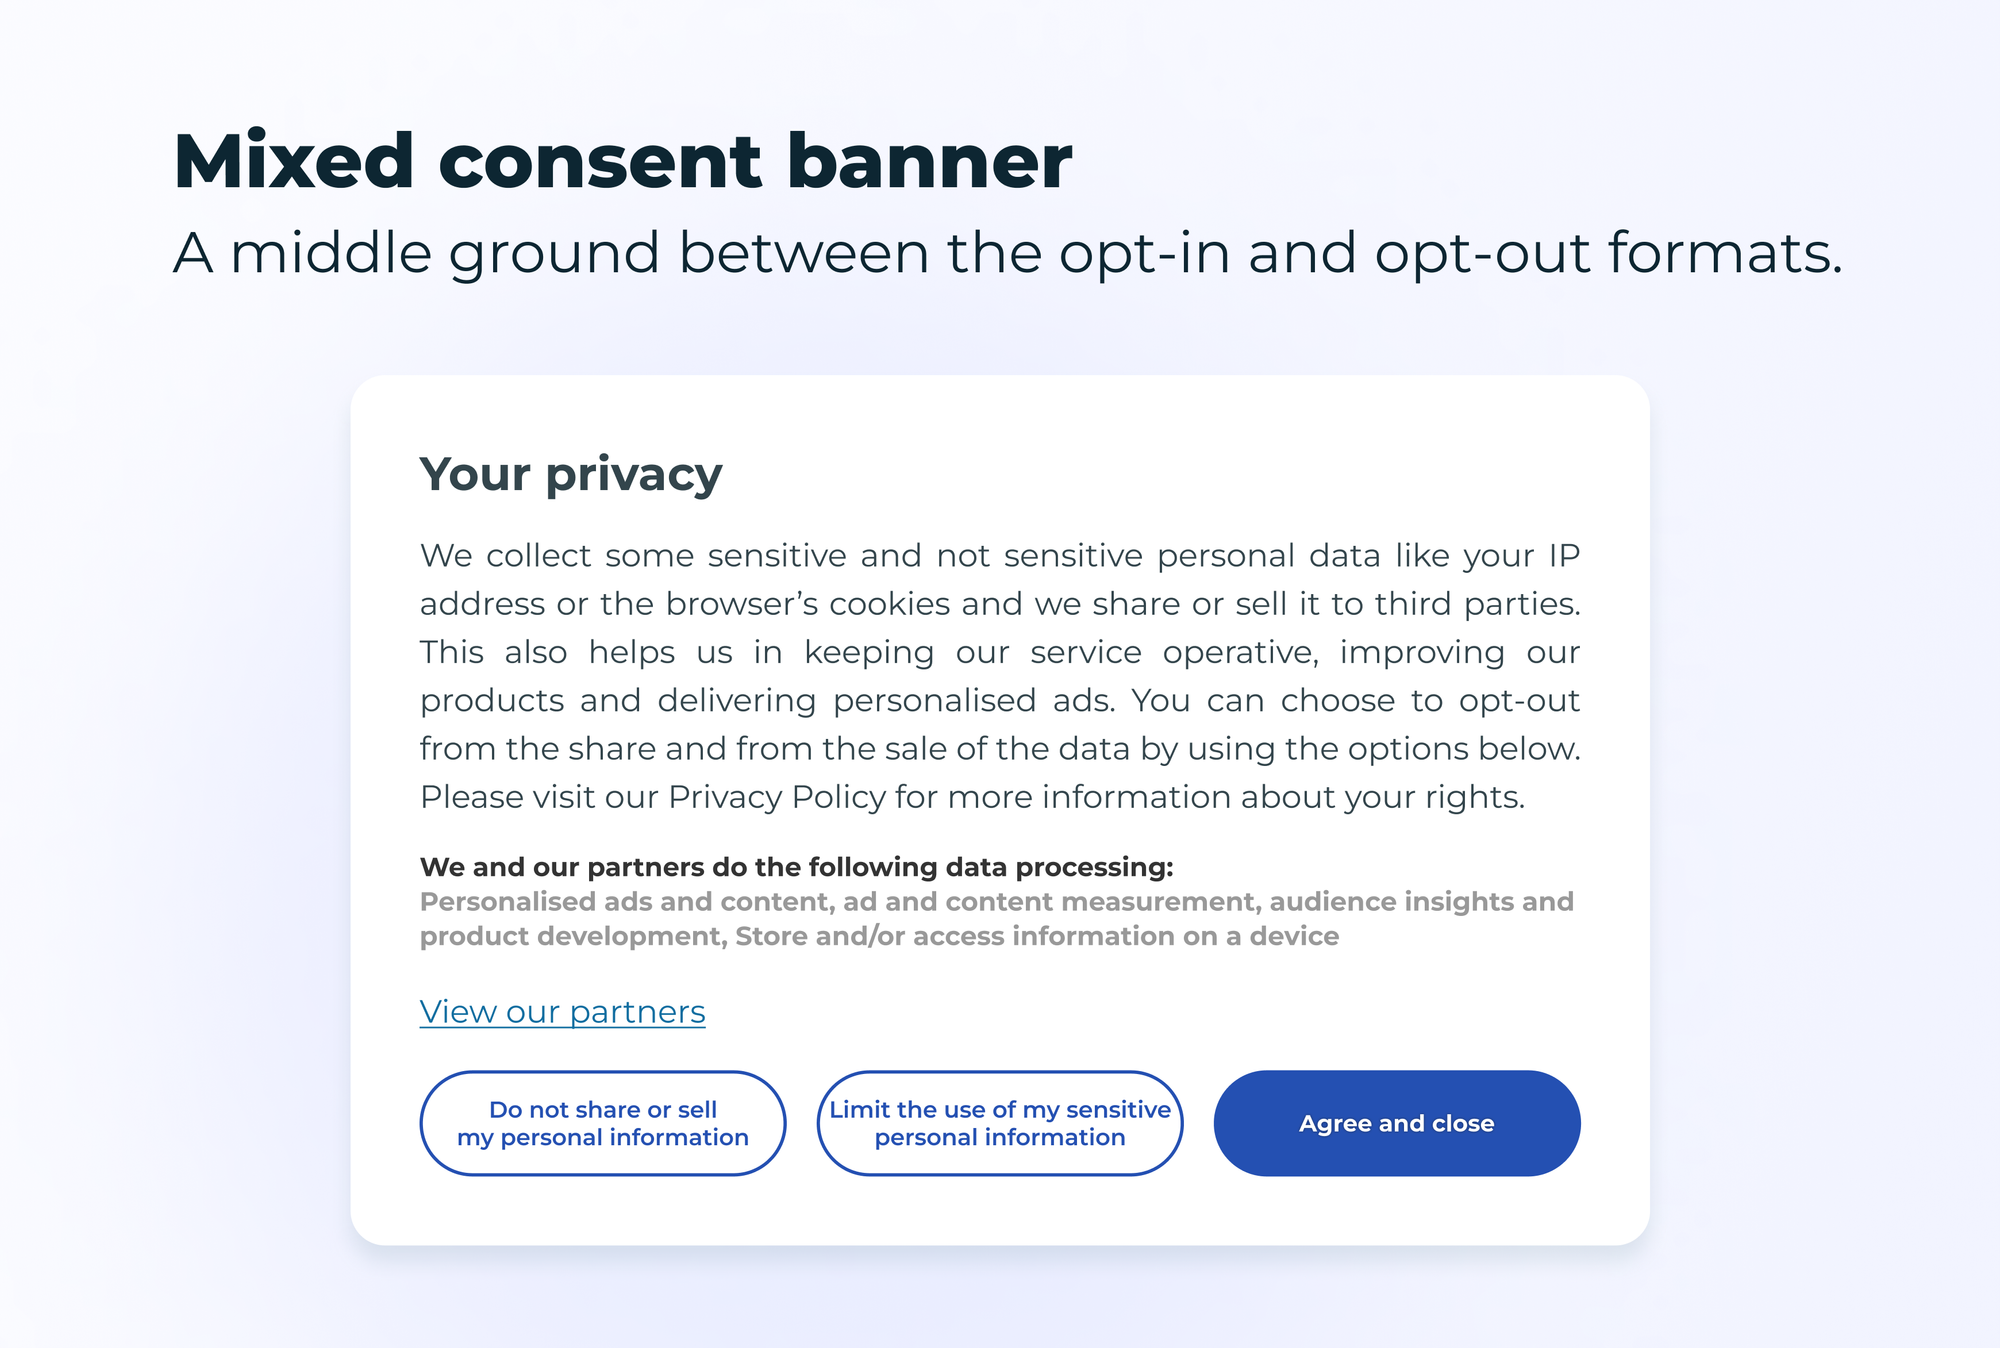 A mockup of a mixed consent banner, with the title "mixed consent banner" and the subtitle "A middle ground between the opt-in and the opt-out formats."